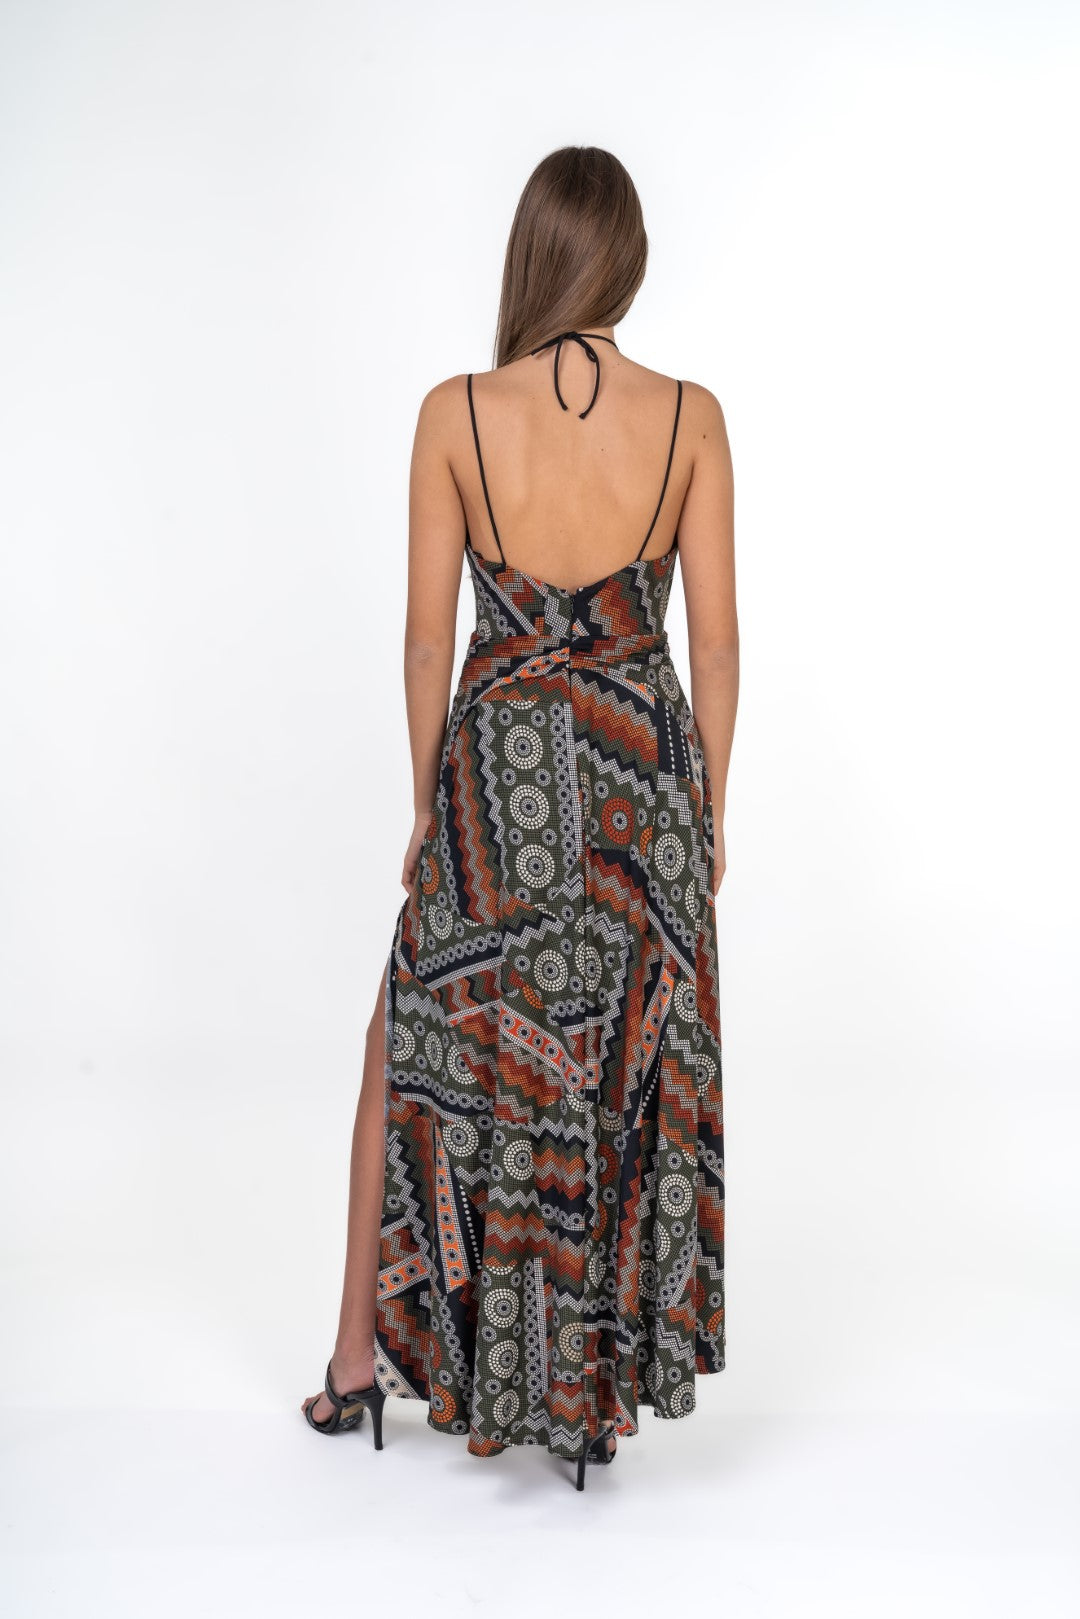 Tribal Low Cut Maxi Dress With Side Slits And Beaded Neckline